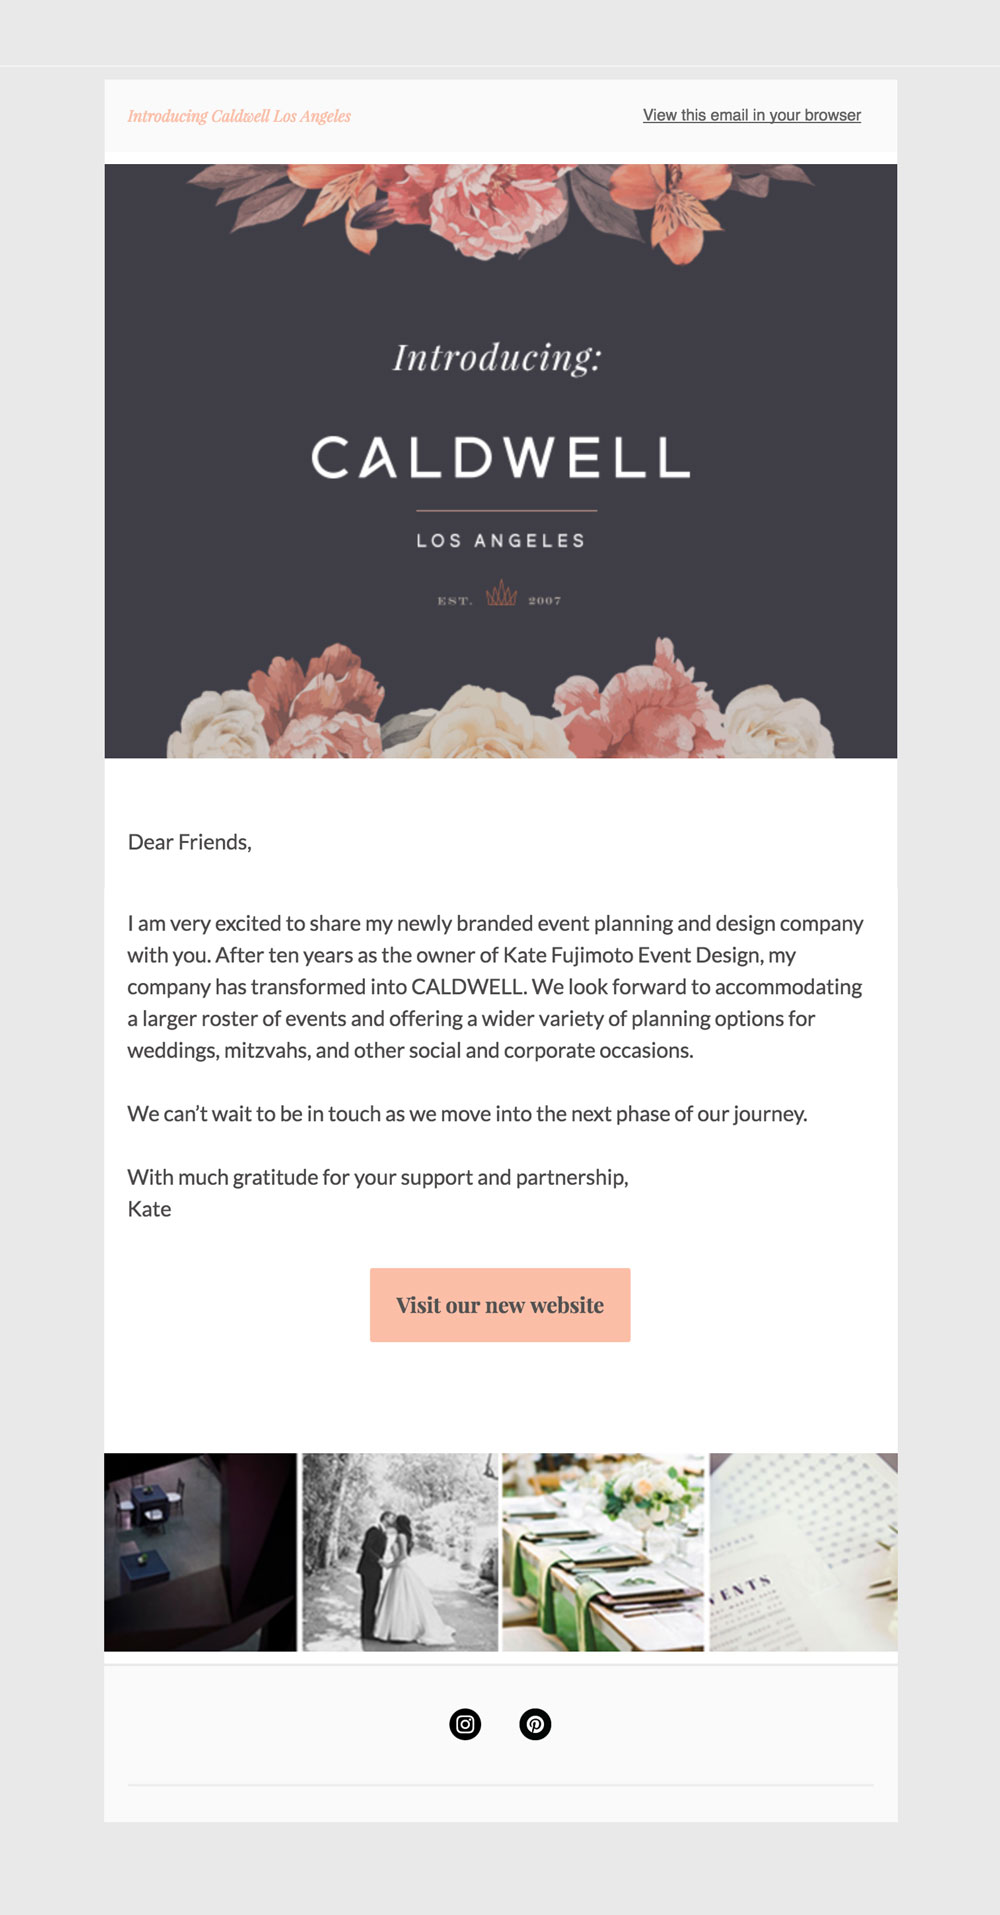 Caldwell email